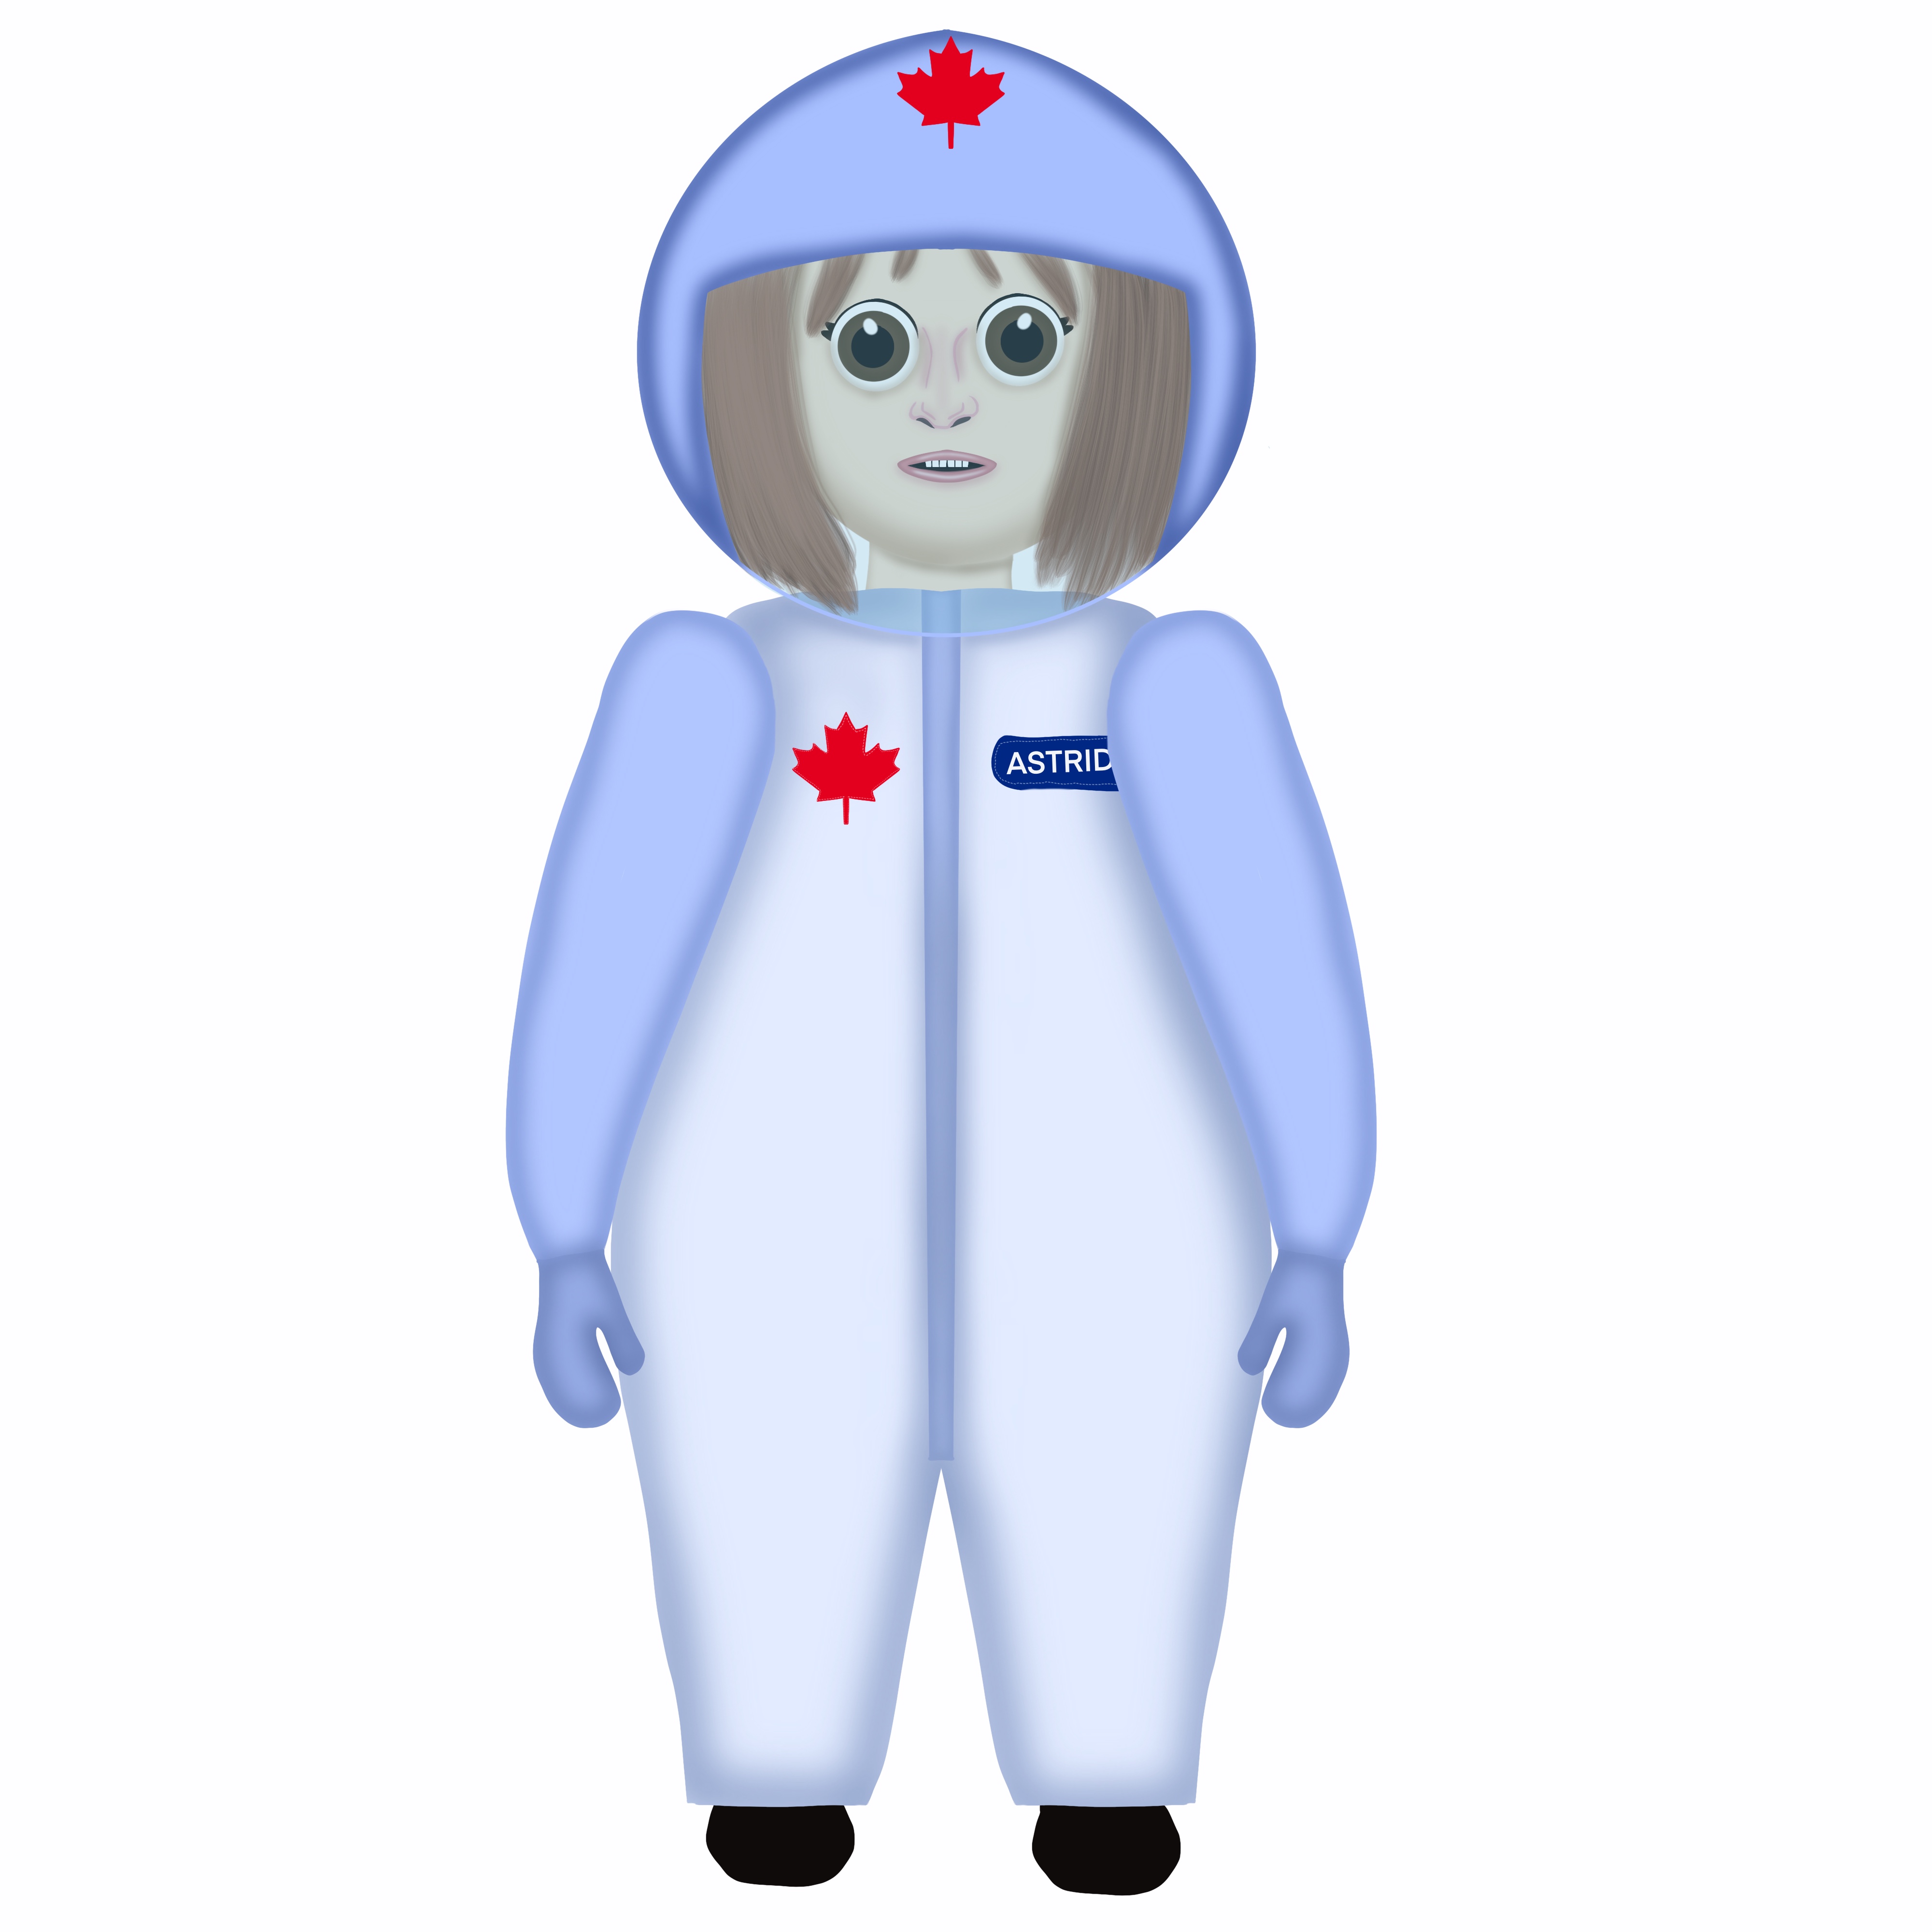 Astrid the Astronaut – Character Insight